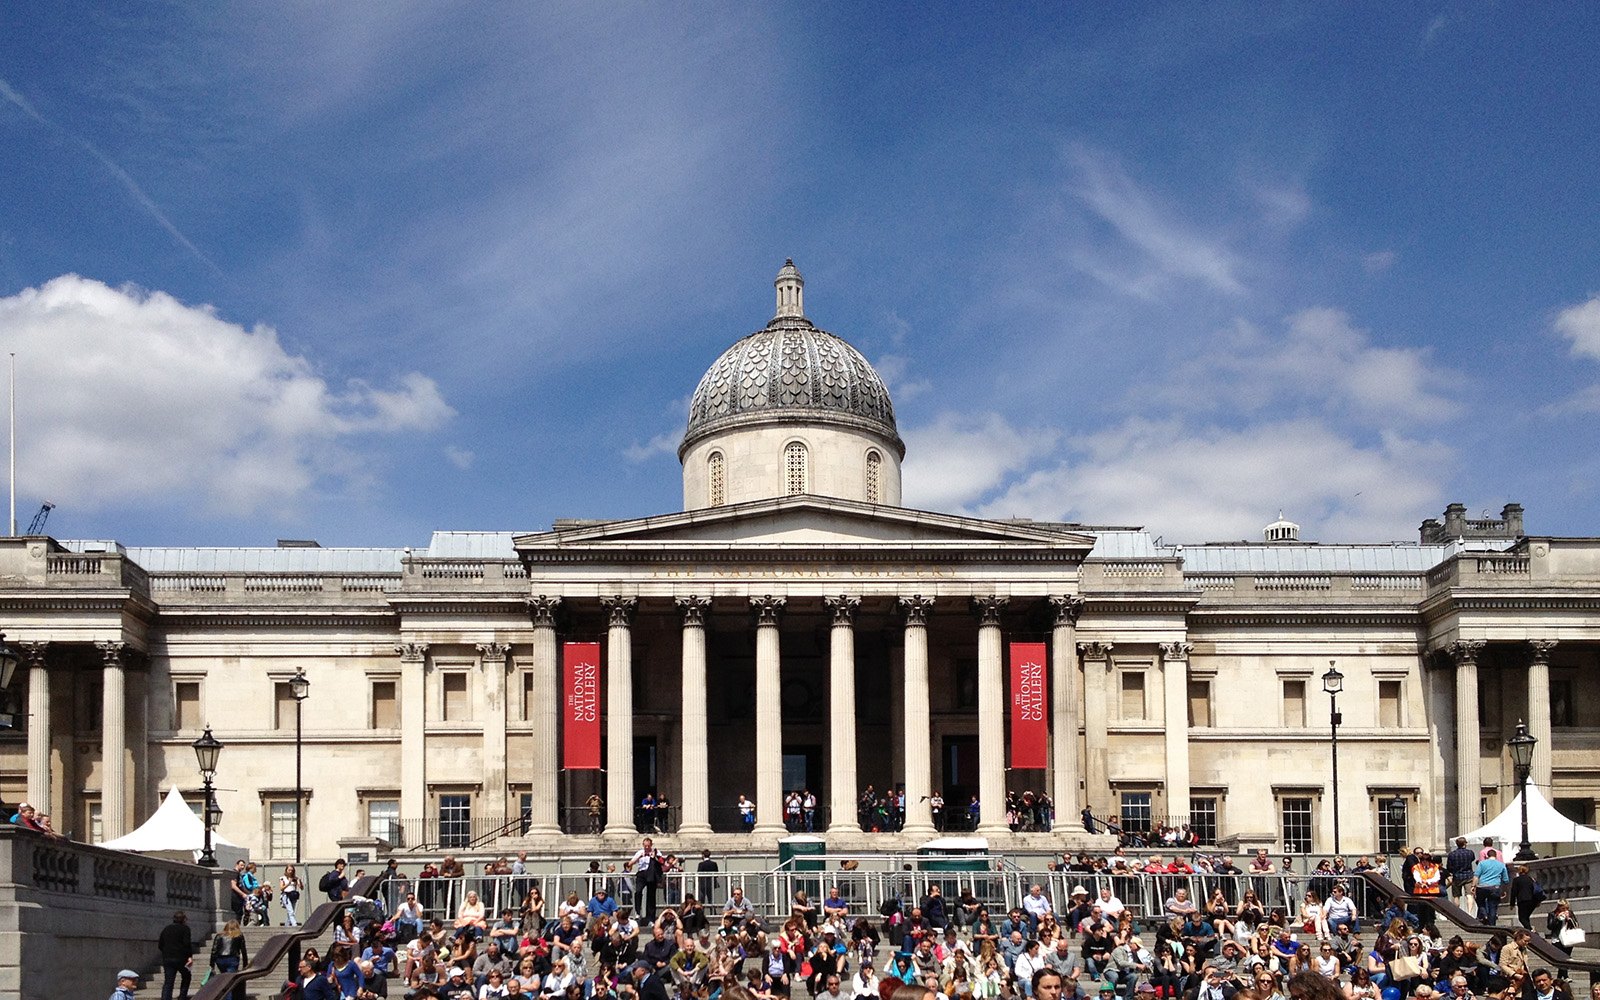 National Gallery, 17 May 2015